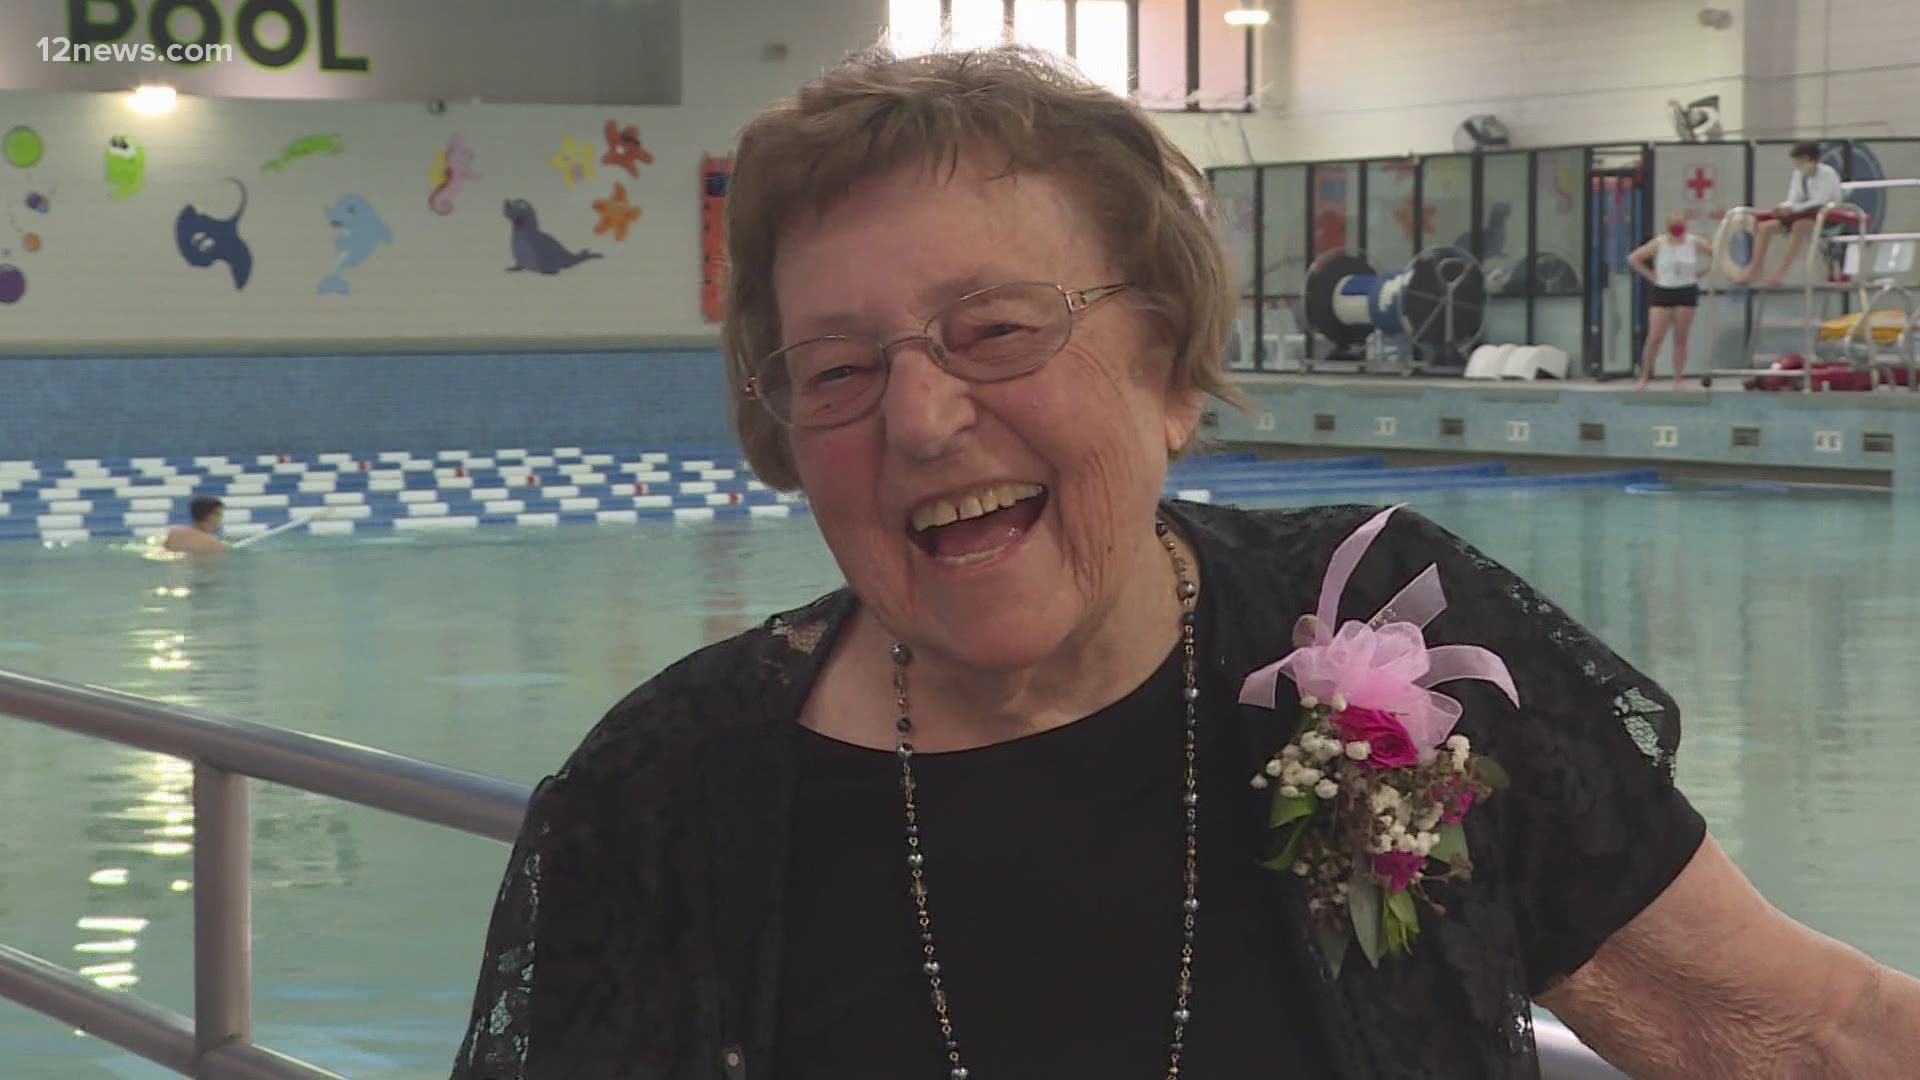 Rita Seaman celebrated her 100th birthday at the Kiwanis pool in Tempe. Her secret to living so long? Just live your life and don't take things too seriously!